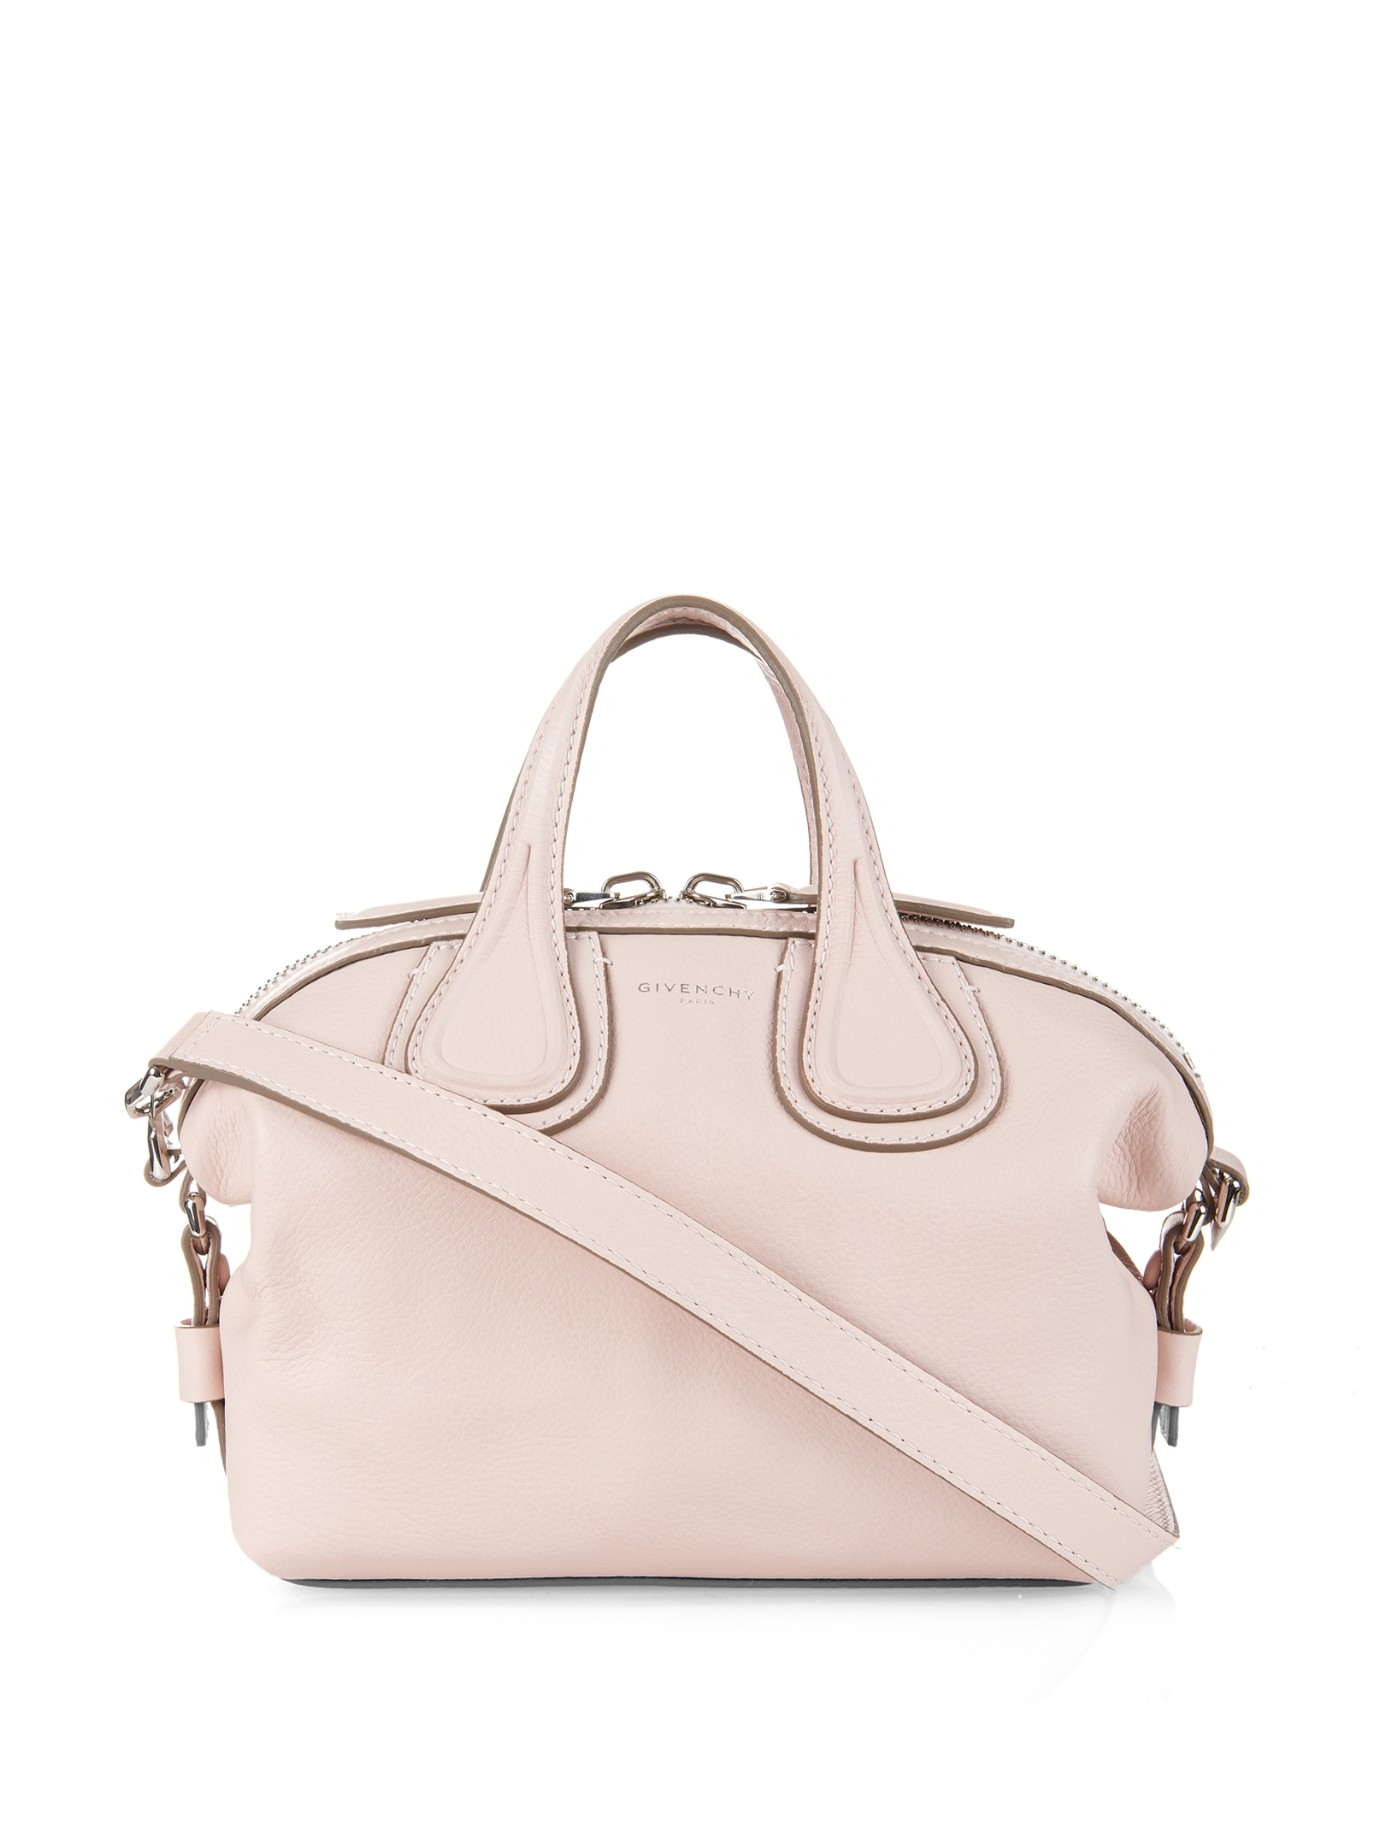 Givenchy Nightingale Mini Leather Cross-Body Bag in Light Pink (Pink) - Lyst